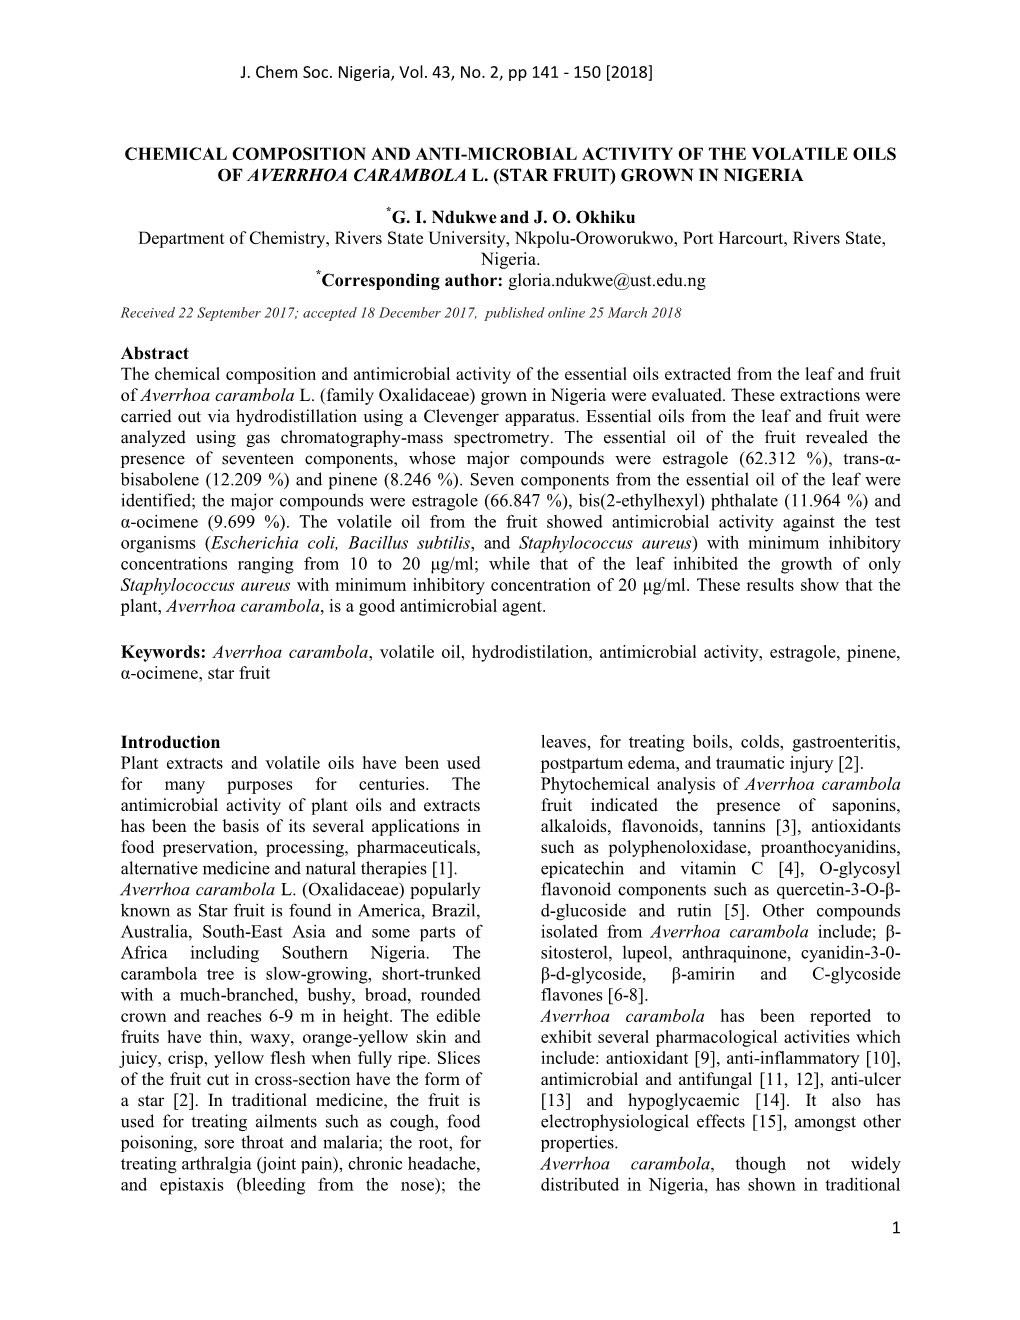 1 Chemical Composition and Anti-Microbial Activity of the Volatile